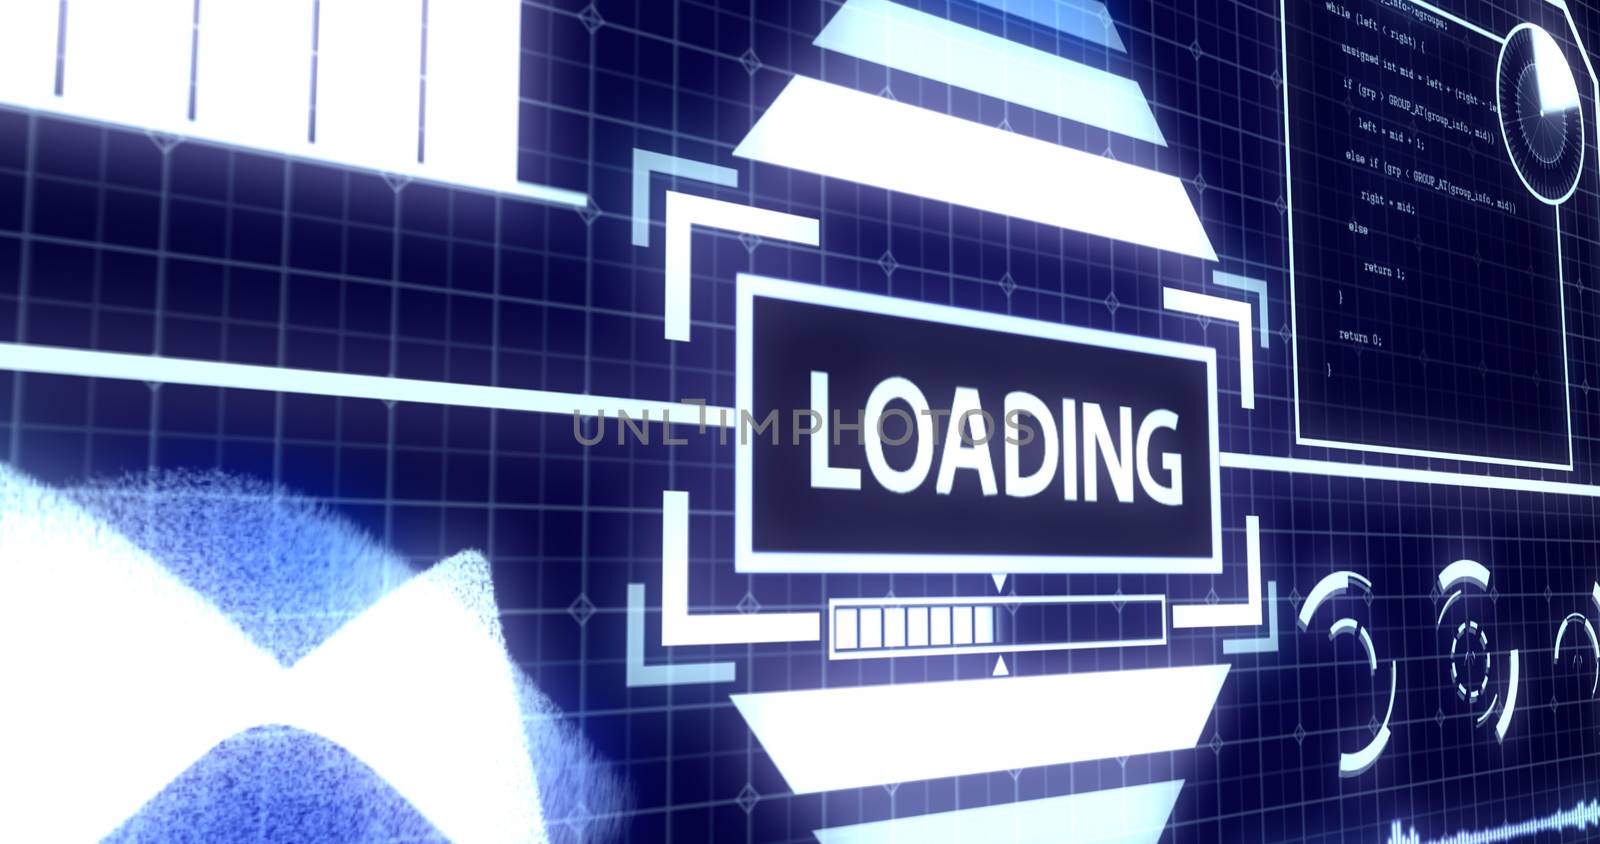 Loading Screen with Process Bar and Digital objects including Soundwave, Graph, Chart, Circles, Radar, Hacker typing and Glowing light bars Ver.2